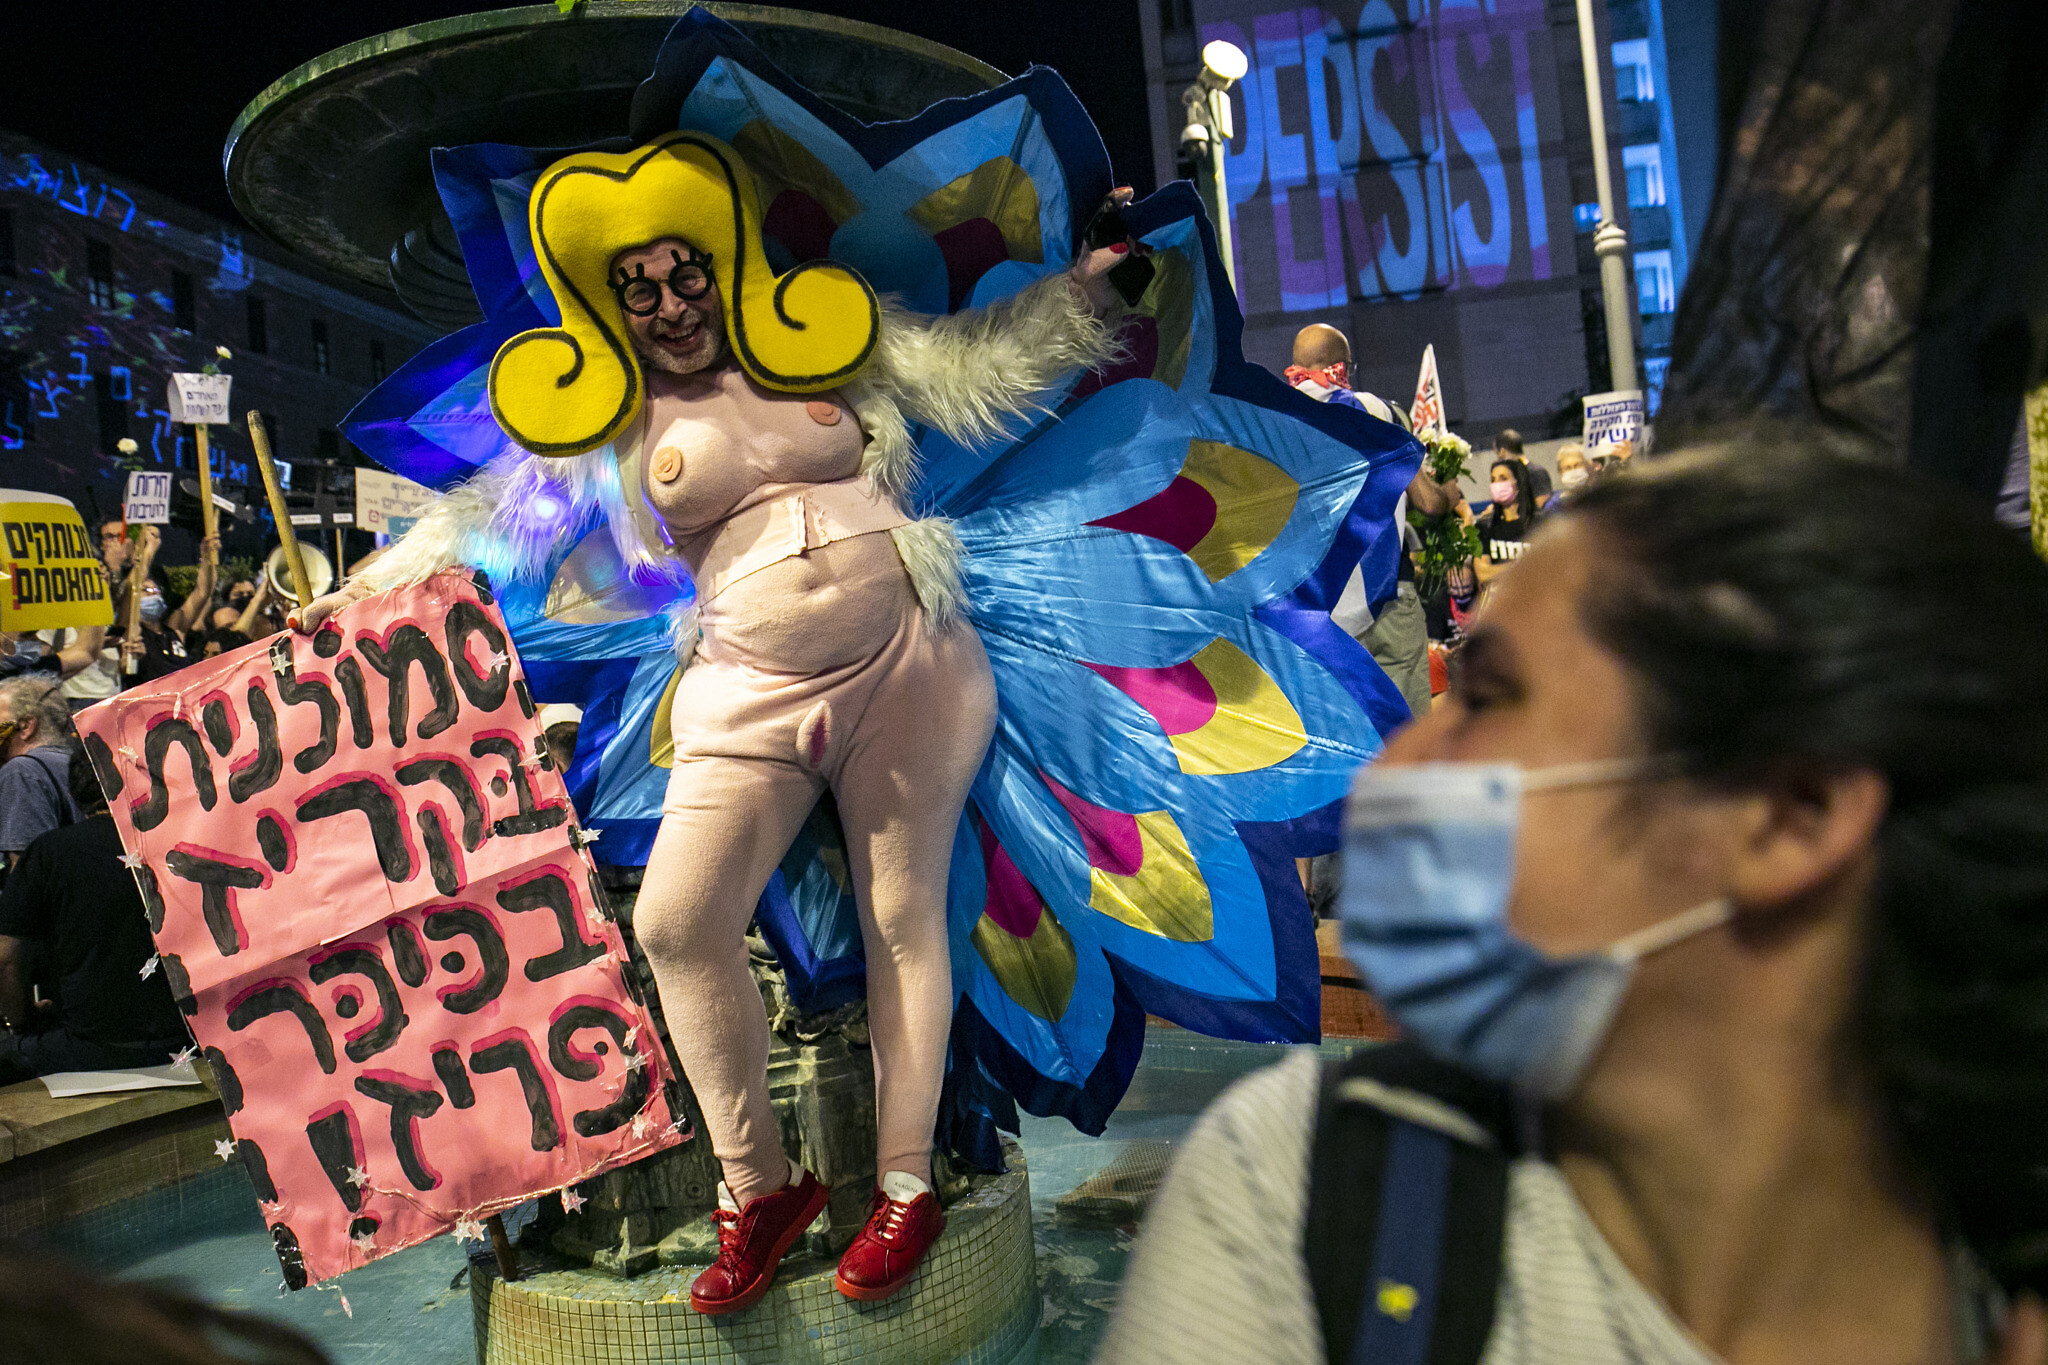 Police arrest artist in naked woman costume at anti-Netanyahu protest The Times of Israel